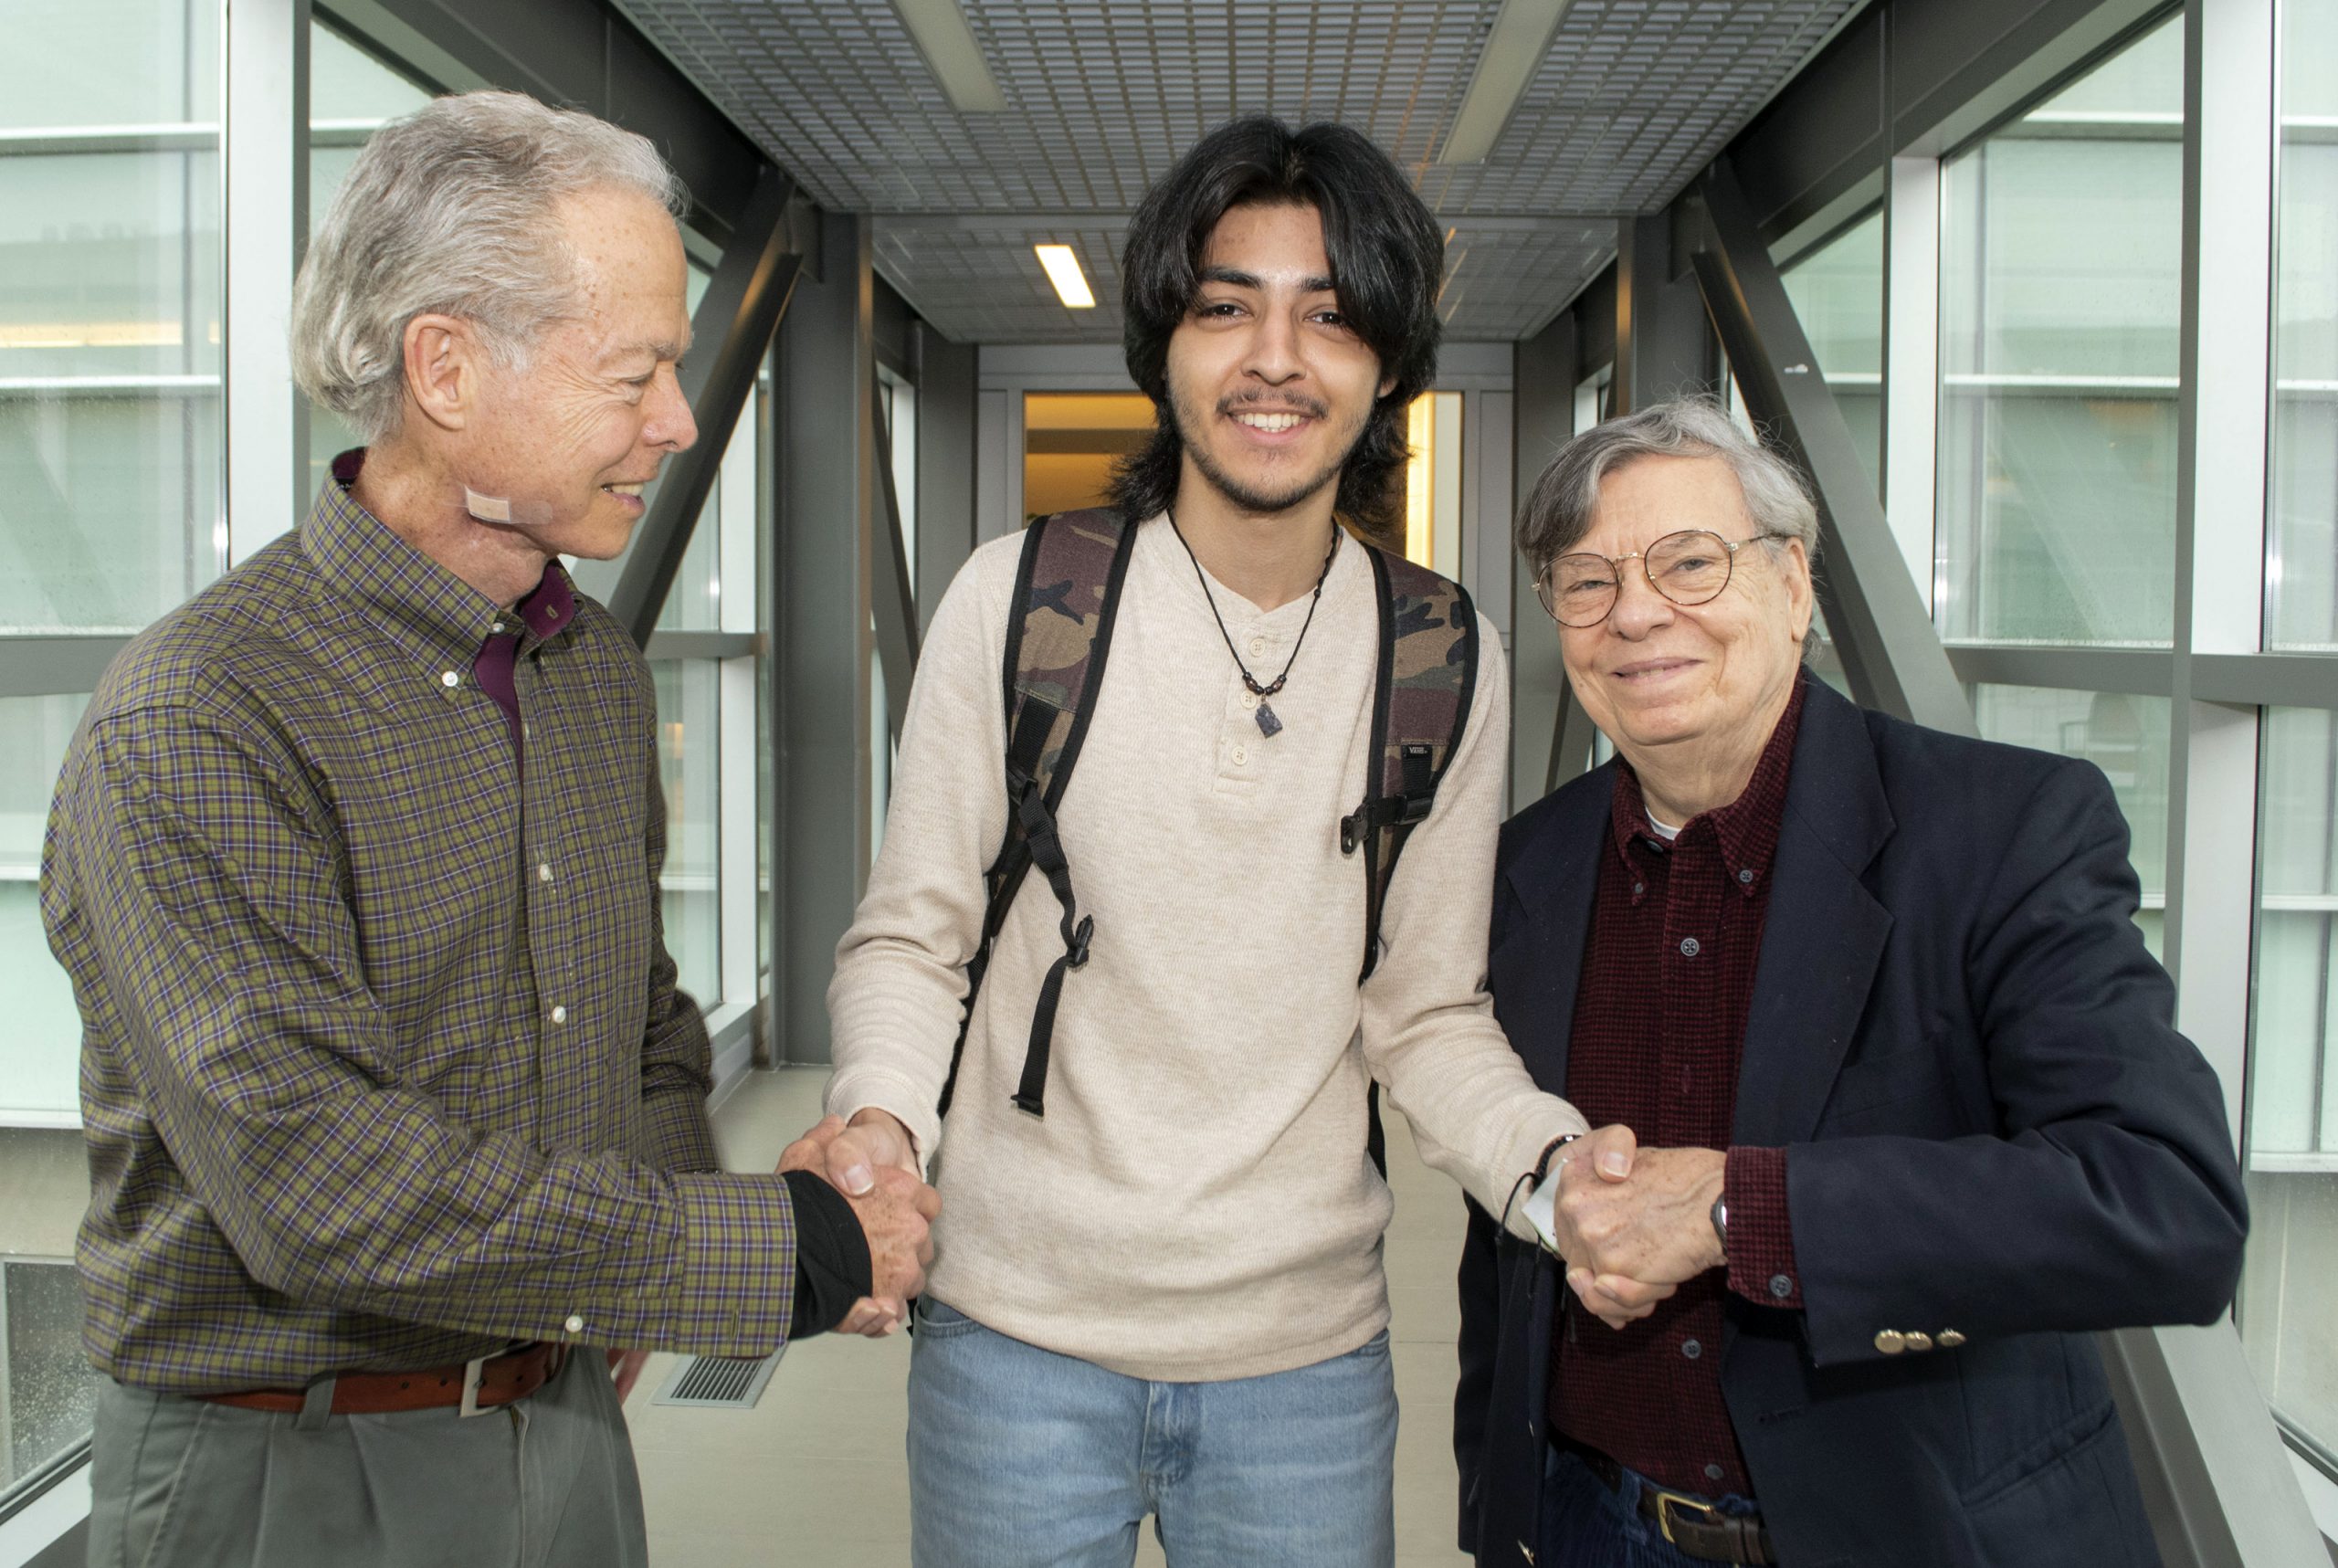 UA Little Rock student Luis Martinez, center, shakes hands with Dr. Terry Trevino-Richard, left, and Dr. Andre Guerrero, right.